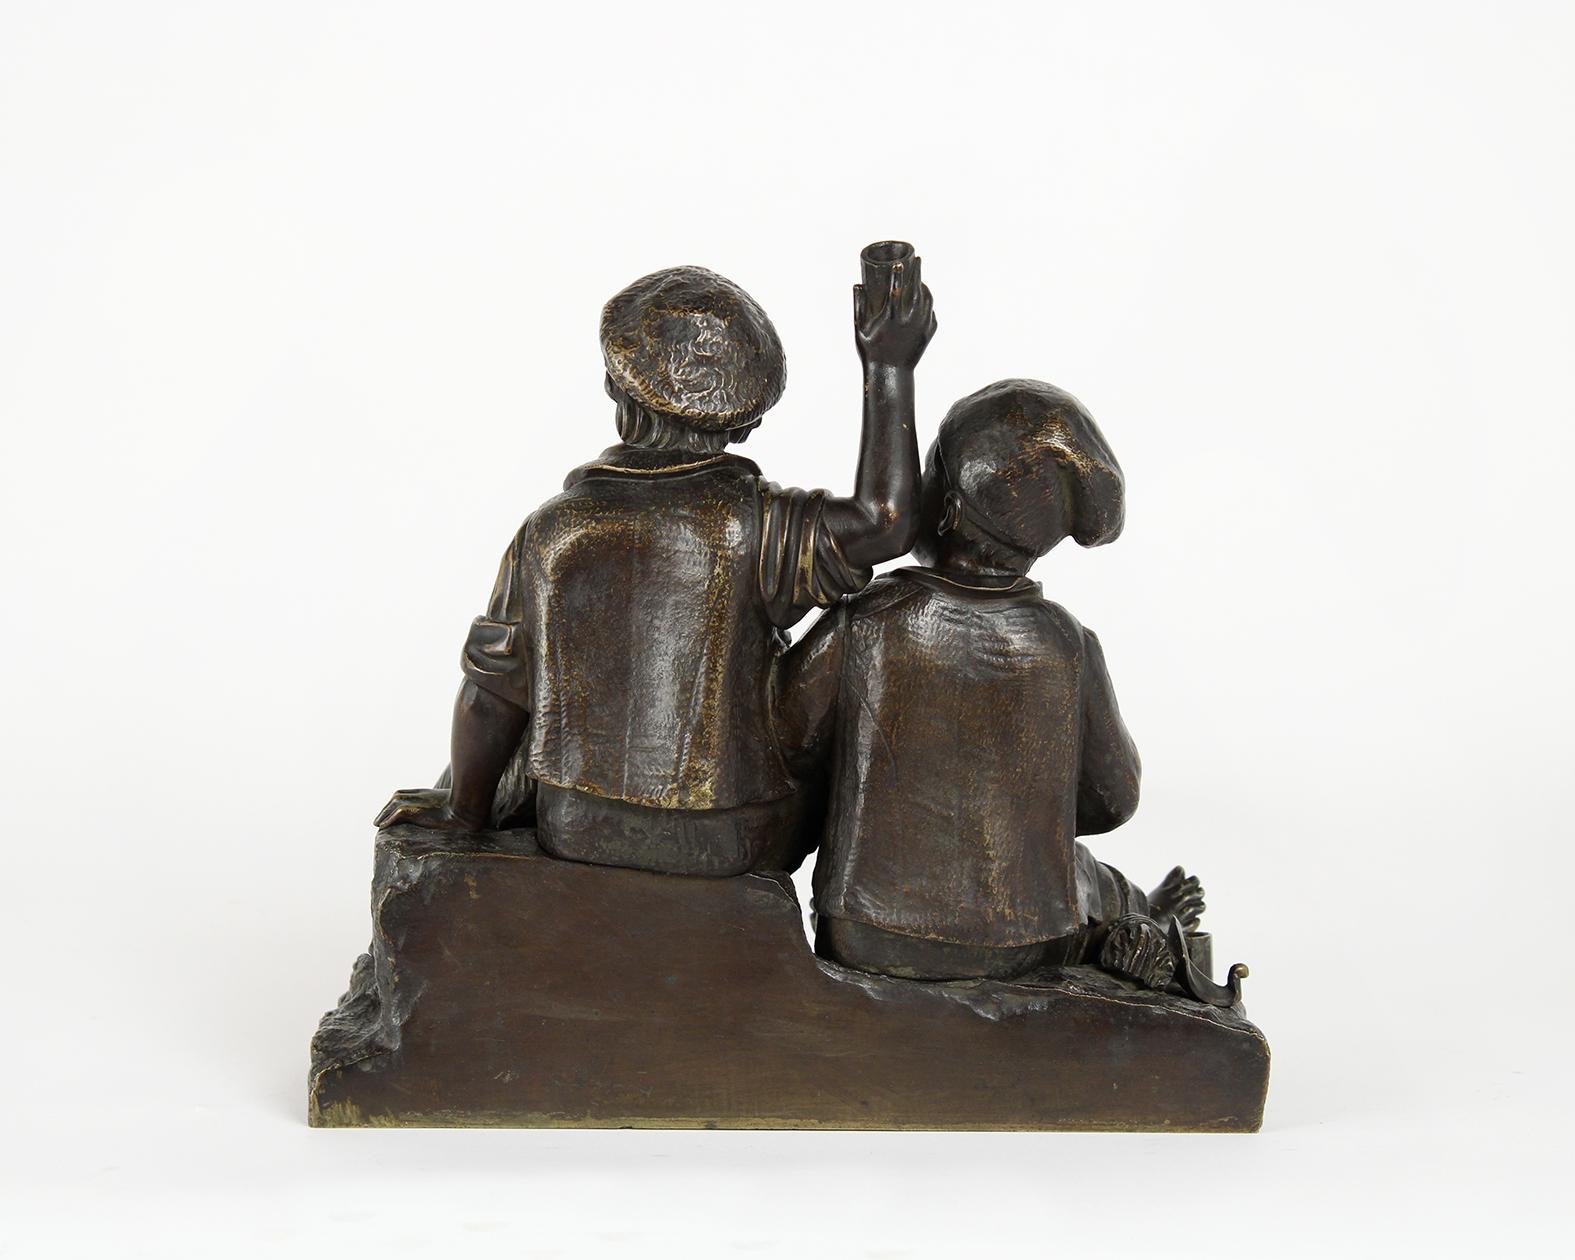 This beautiful French mid-19th century bronze statue figurine has very fine details that have been waxed and polished giving it a beautiful patina finish. This small statue depicting two beggars eating and drinking while sitting on rocks with their